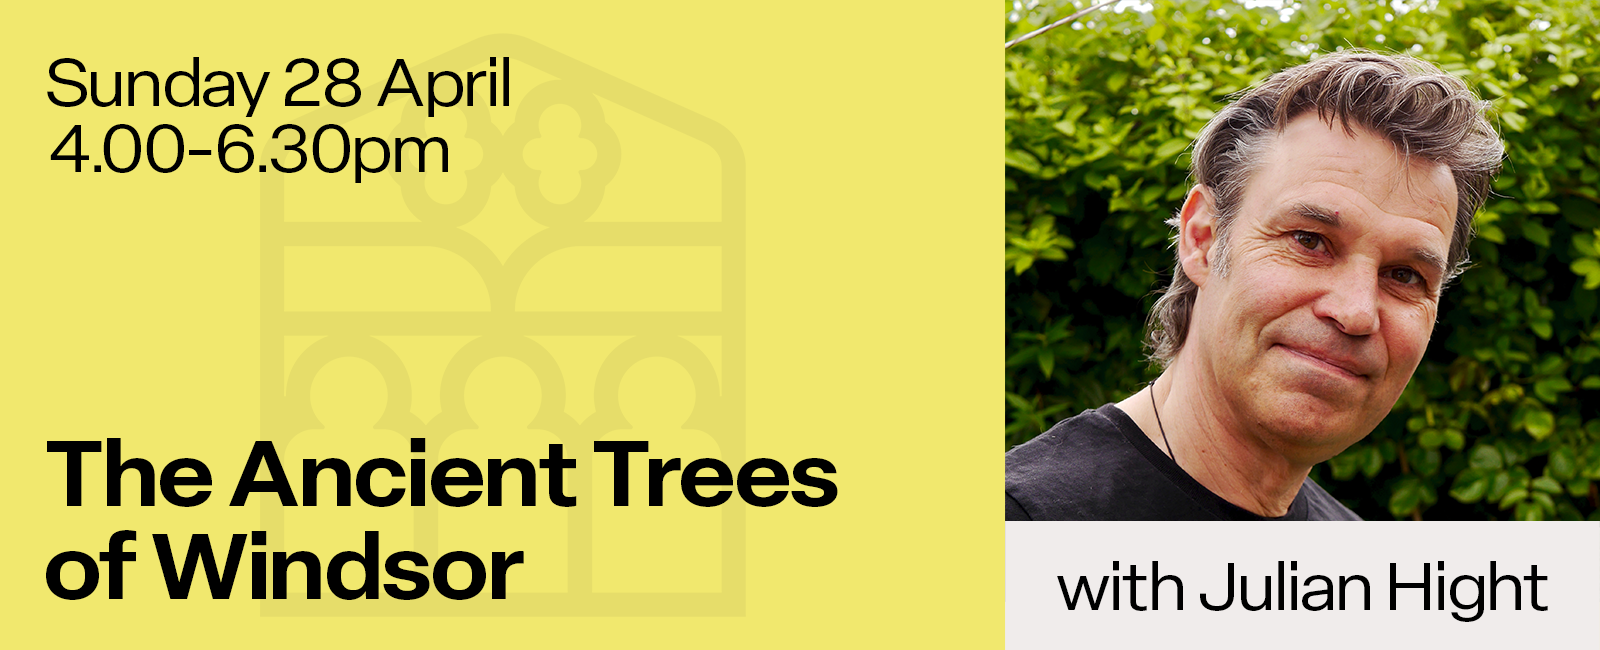 The Ancient Trees of Windsor with Julian Hight